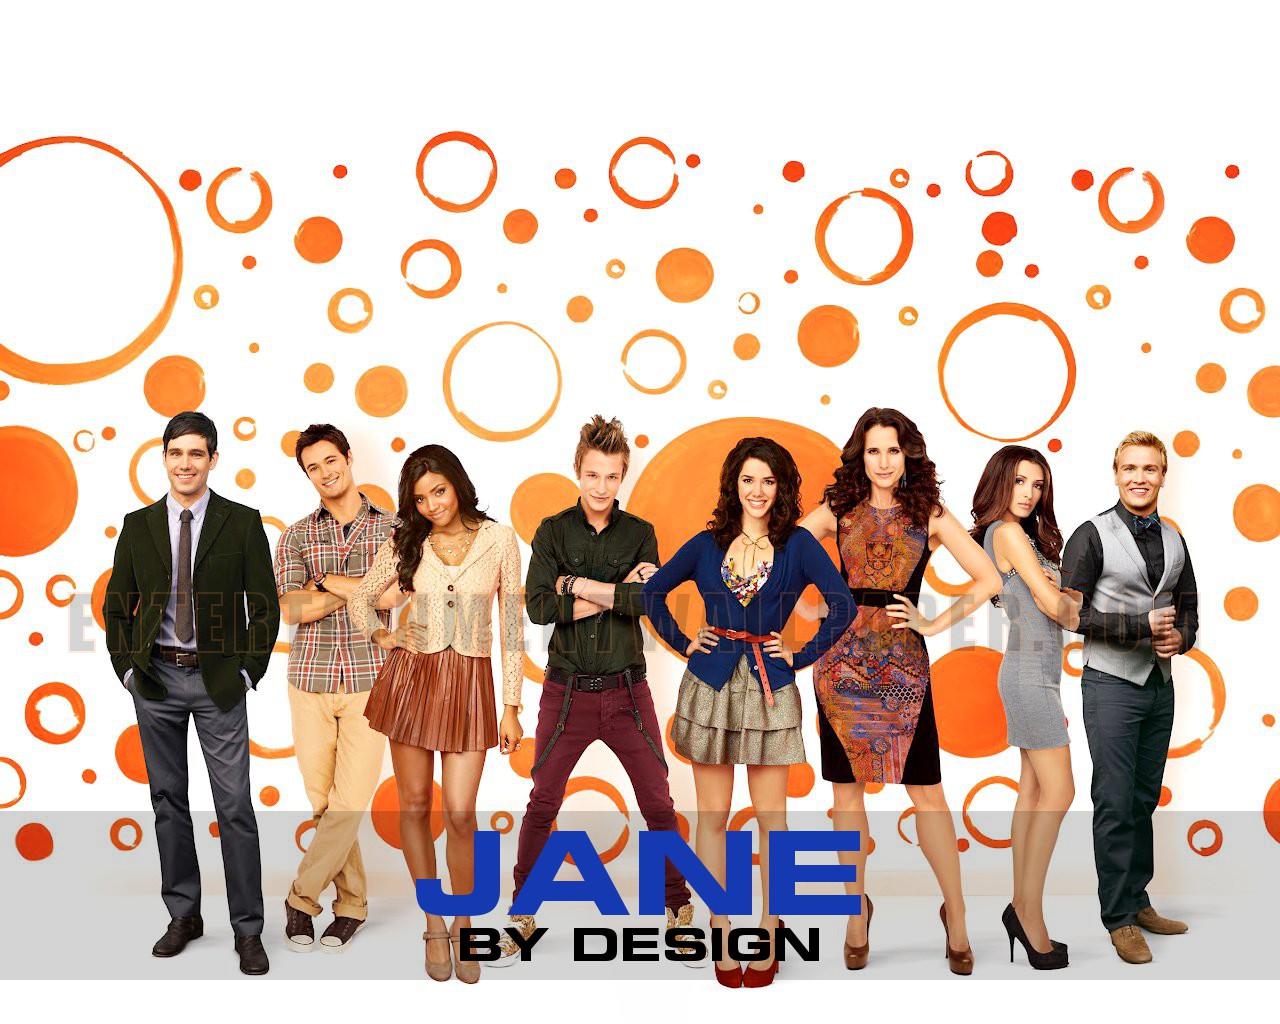 Jane By Design Wallpaper Size More